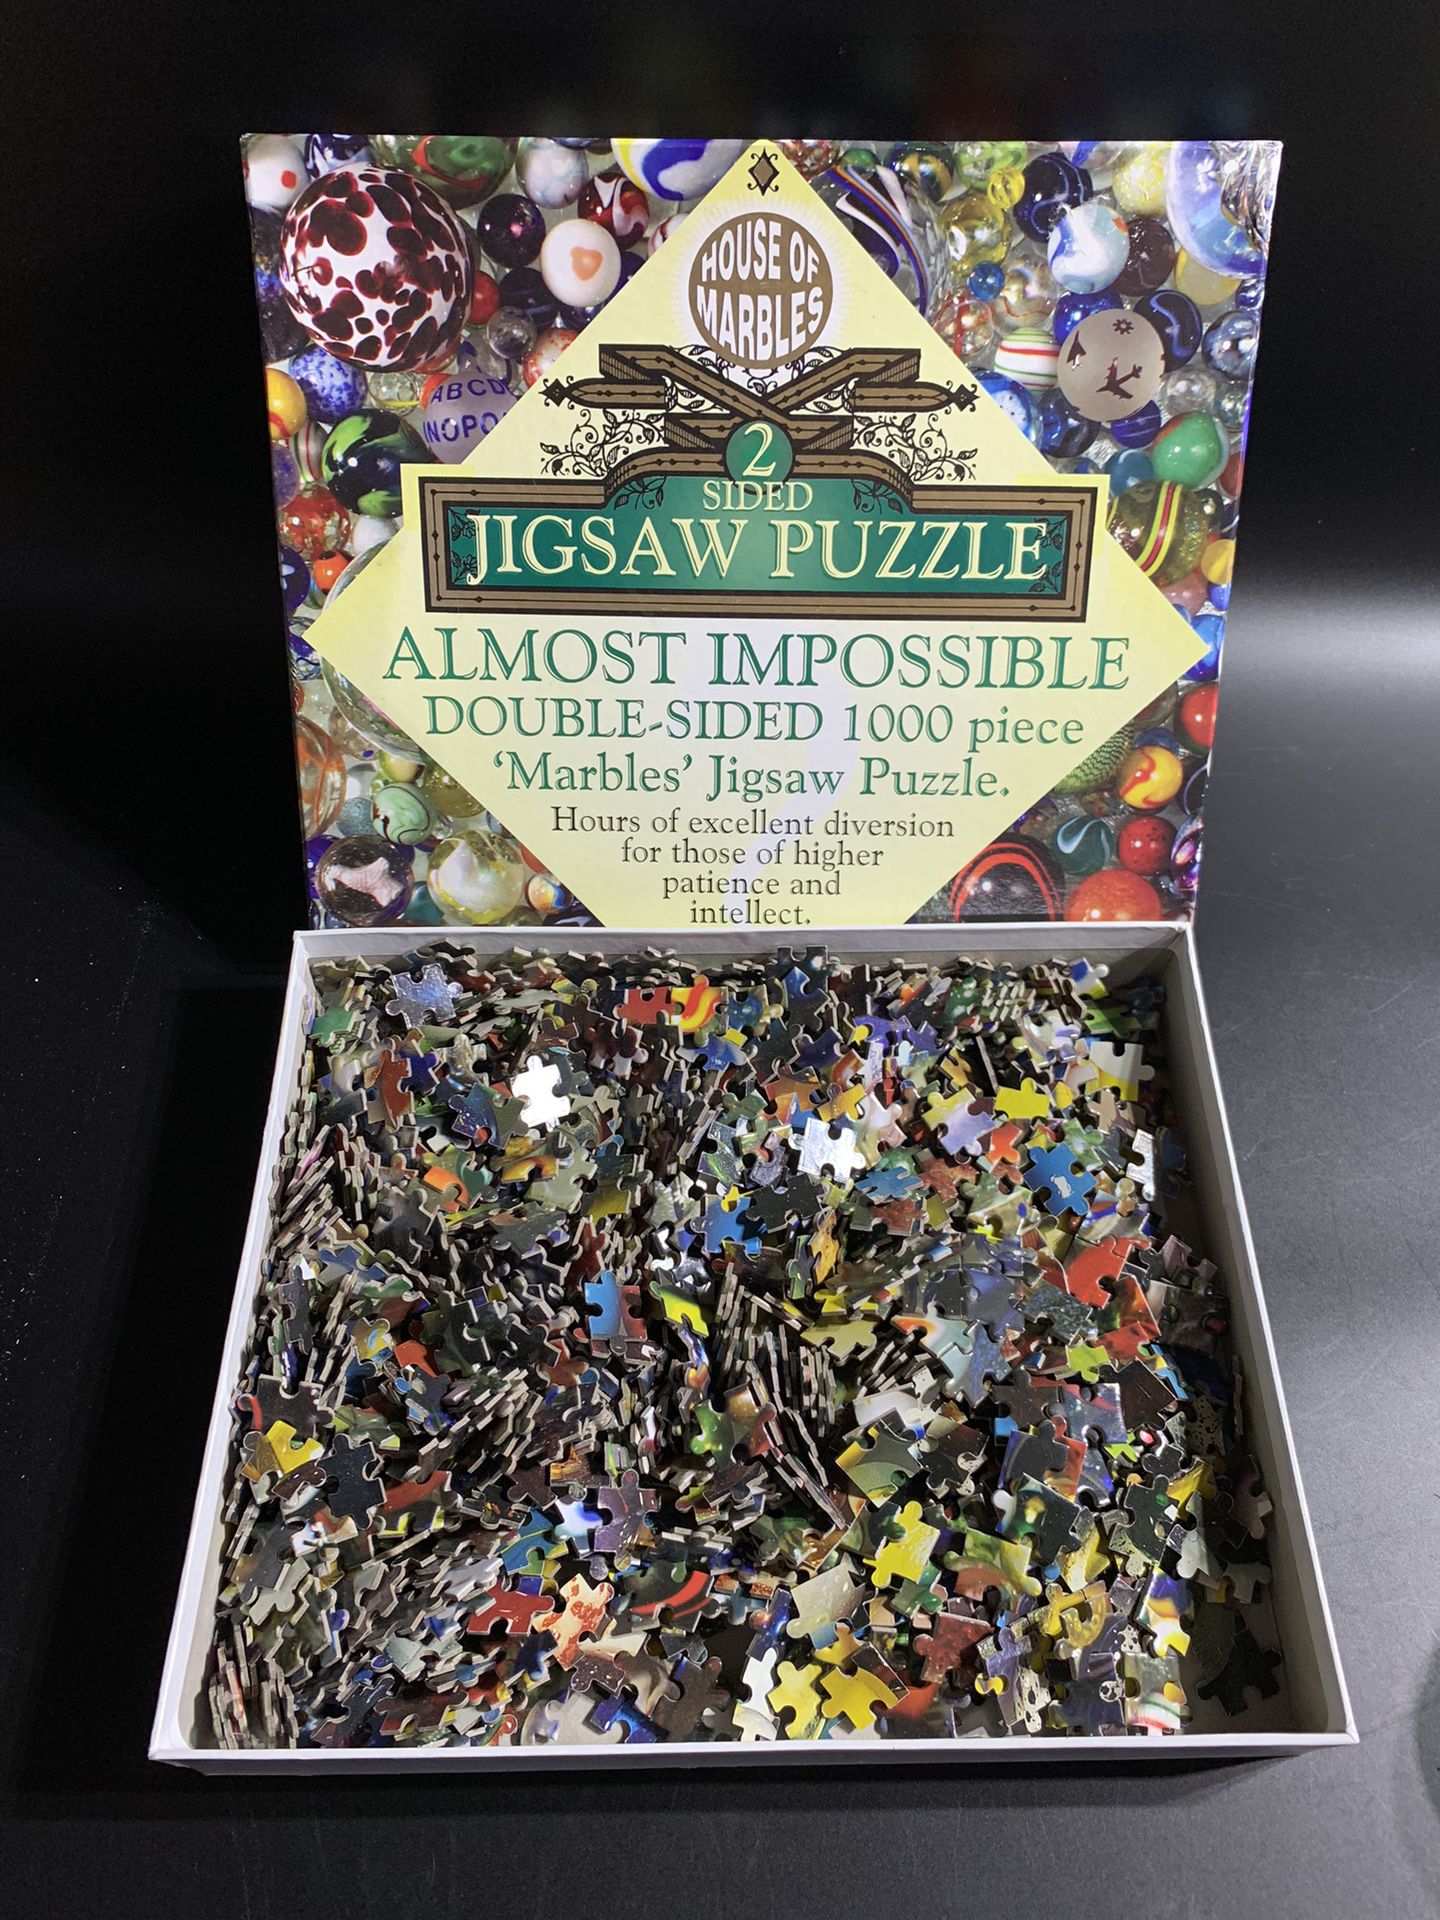 1000 Piece 2 Sided Almost Impossible Double Sided Marble Jigsaw Puzzle 29.5”x19.5”   Enhance your puzzle-solving skills with this challenging 1000-pie